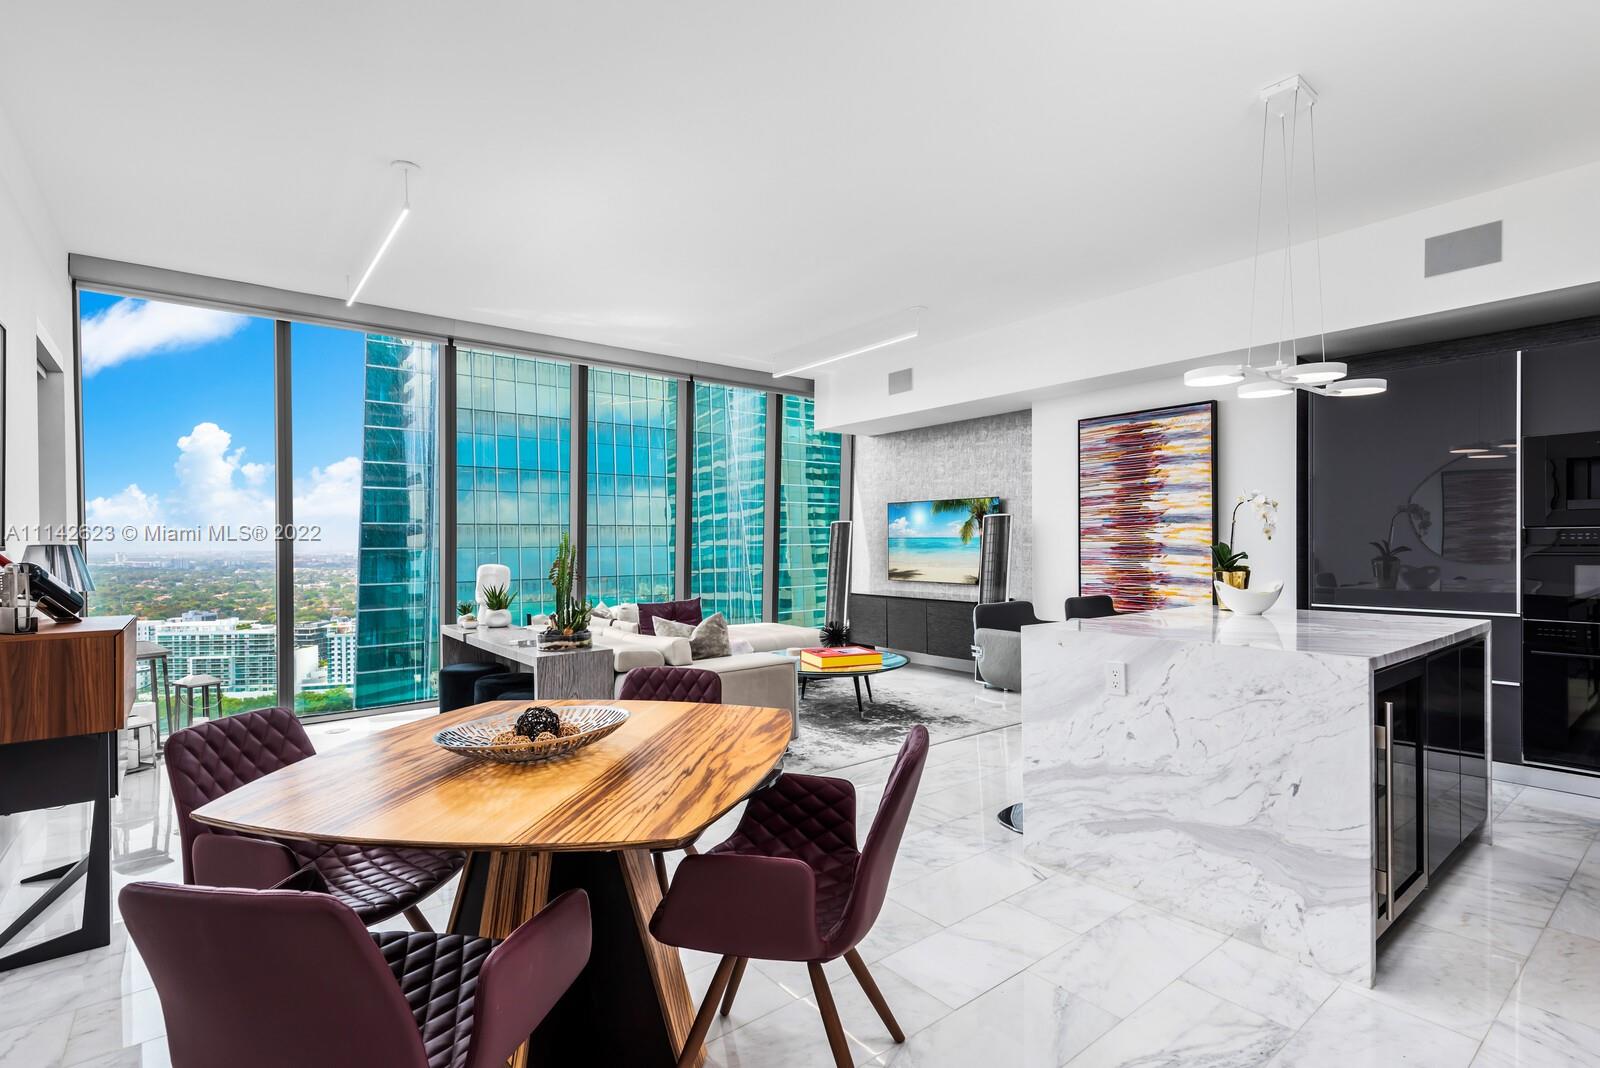 One-of-a-kind Carlos Ott-designed unit in ECHO Brickell spans 1,455sqft and showcases flawless luxury throughout. Expansive floor-to-ceiling windows frame city and water vistas while drawing natural light into the open-concept living space. Marble floors flow underfoot and the gourmet kitchen boasts high-end Wolf and Sub-Zero appliances, an island and sleek Italian cabinetry. Smart-home enabled with surround sound speakers along with one tanning balcony and second terrace with outdoor barbeque. Custom layout with 2 bedrooms and 2.5 baths including the primary bedroom with deep walk-in closet. Extra features include full size washer and dryer in unit and a host of building amenities including gym, spa, 24-hour valet, house car and multiple pools with spectacular bay and city views.